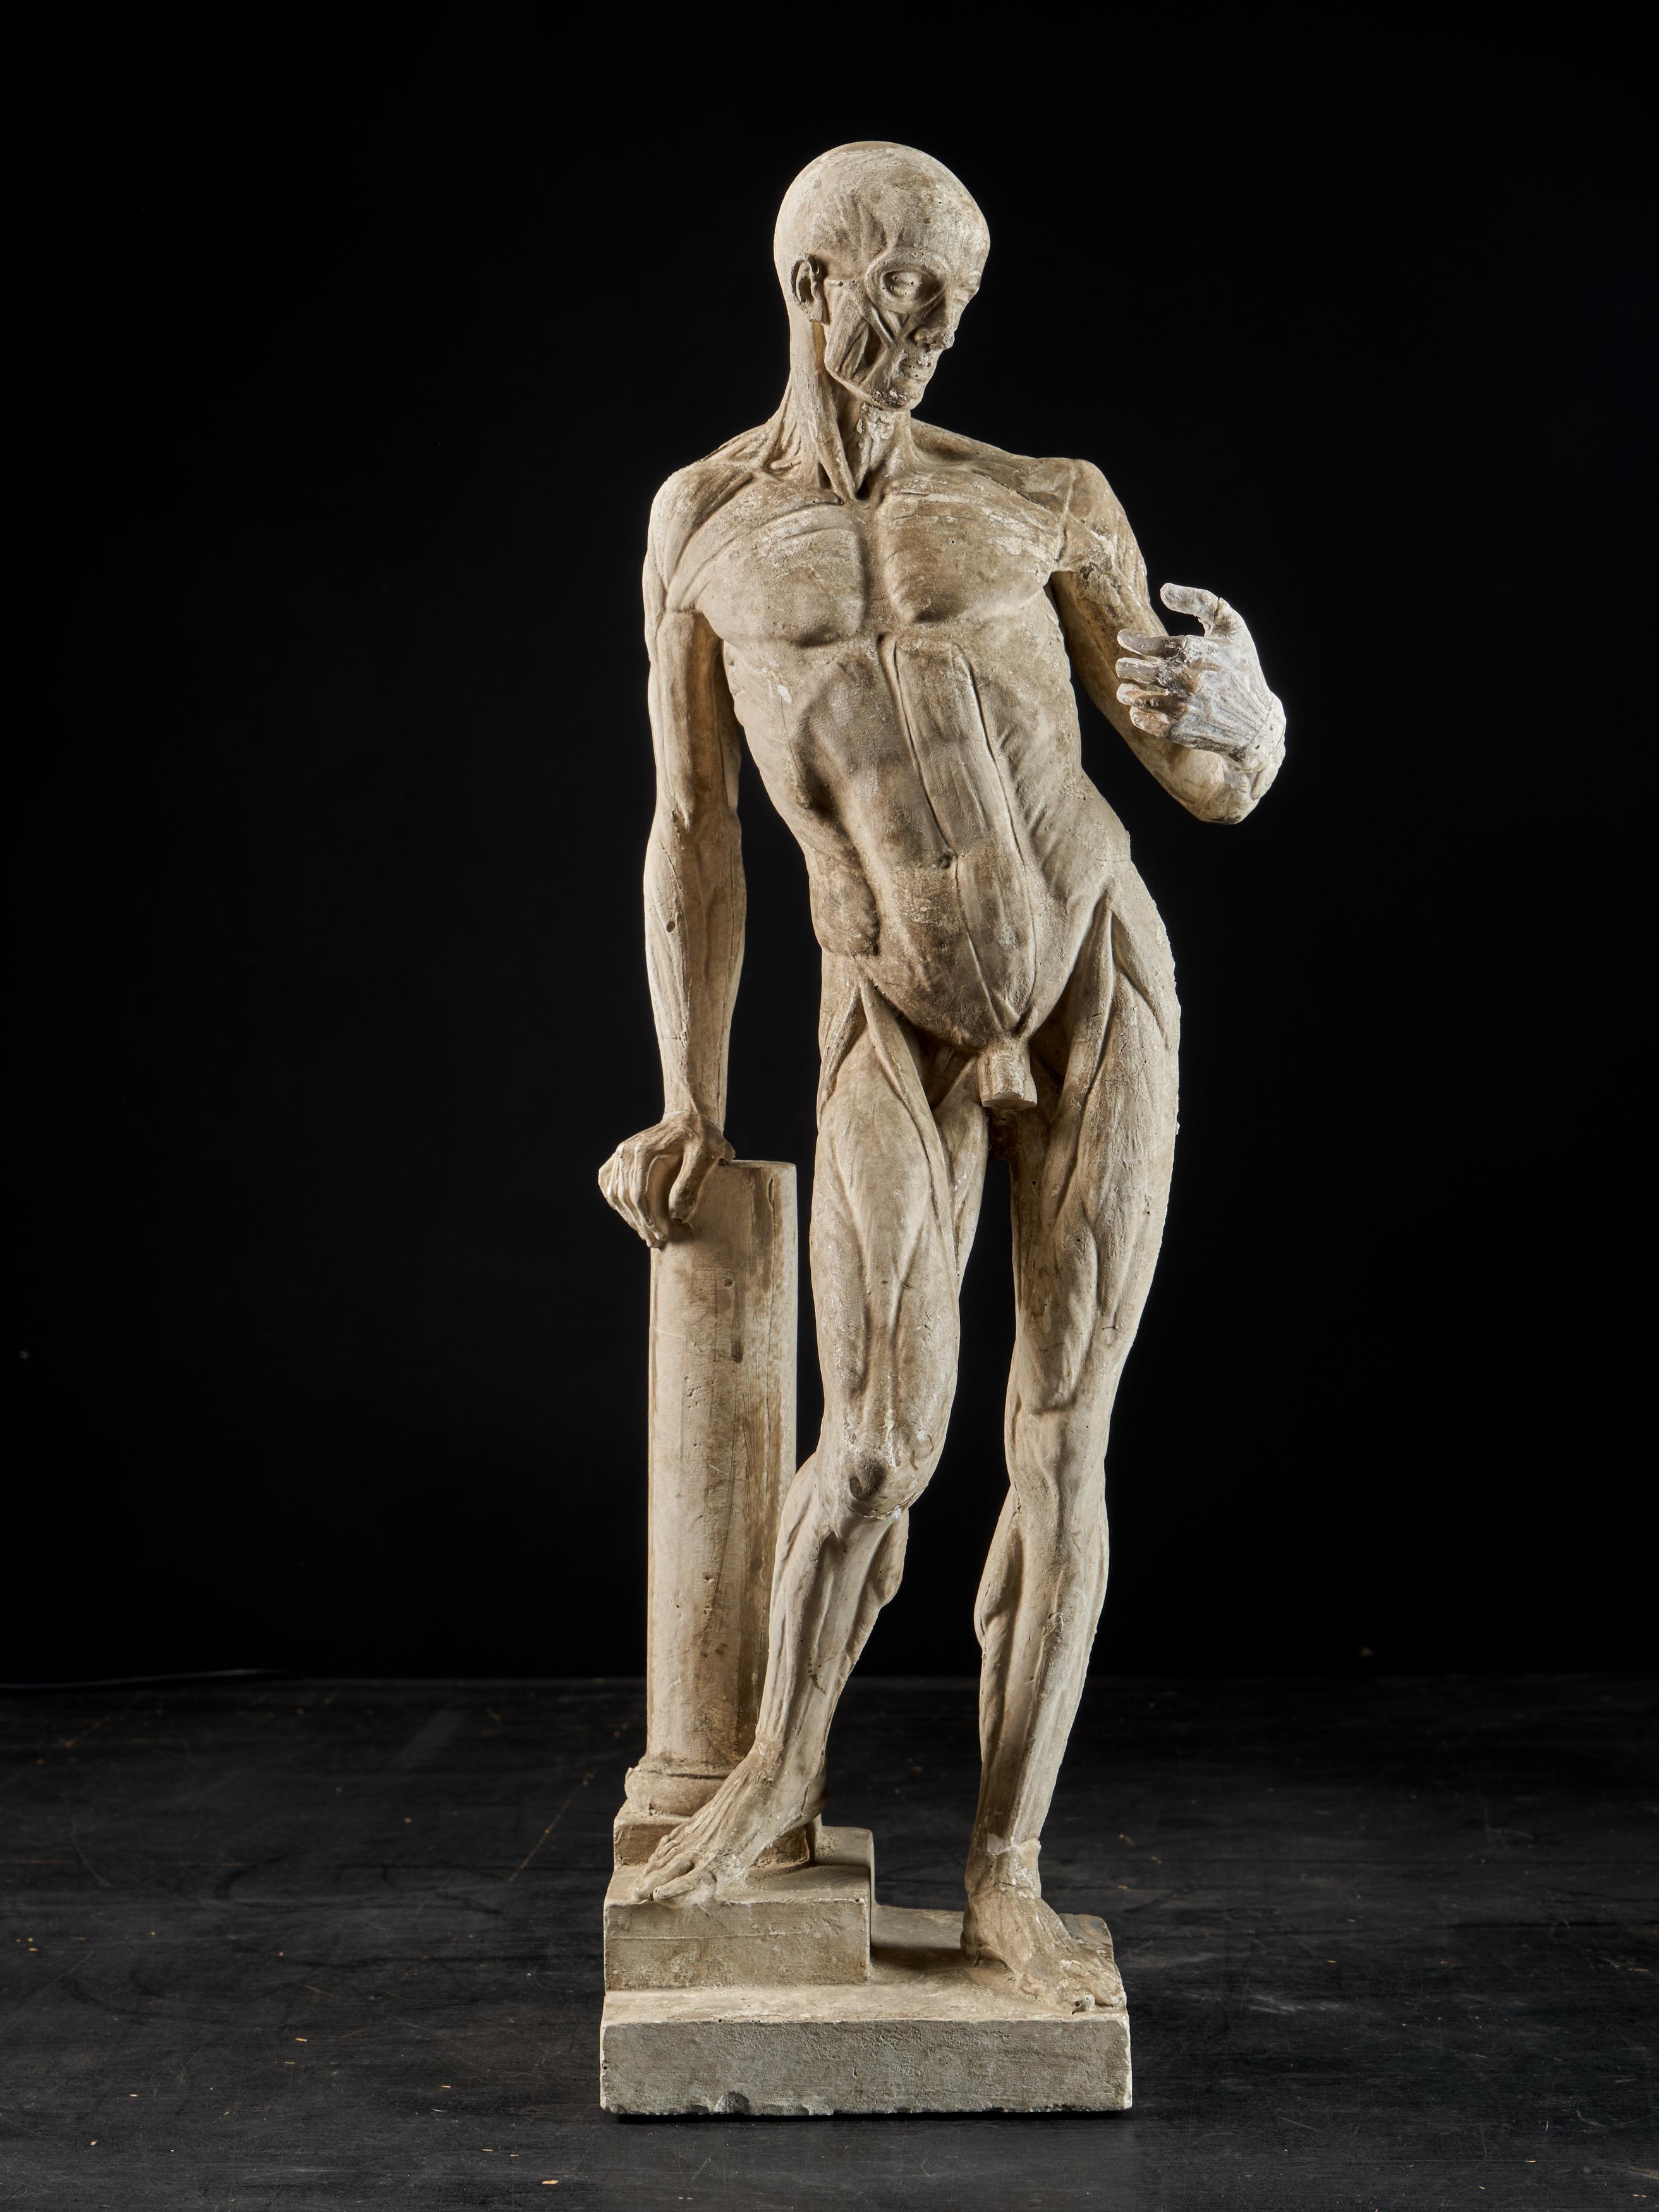 A fine quality flayed or écorche figure taken from the originals by Jean Antoine Houdon (1741-1828).Houdon created his flayed man while in Rome in the 1760s and based it upon the Doryphoros or spear carrier by Polykleitos. It has been used as an